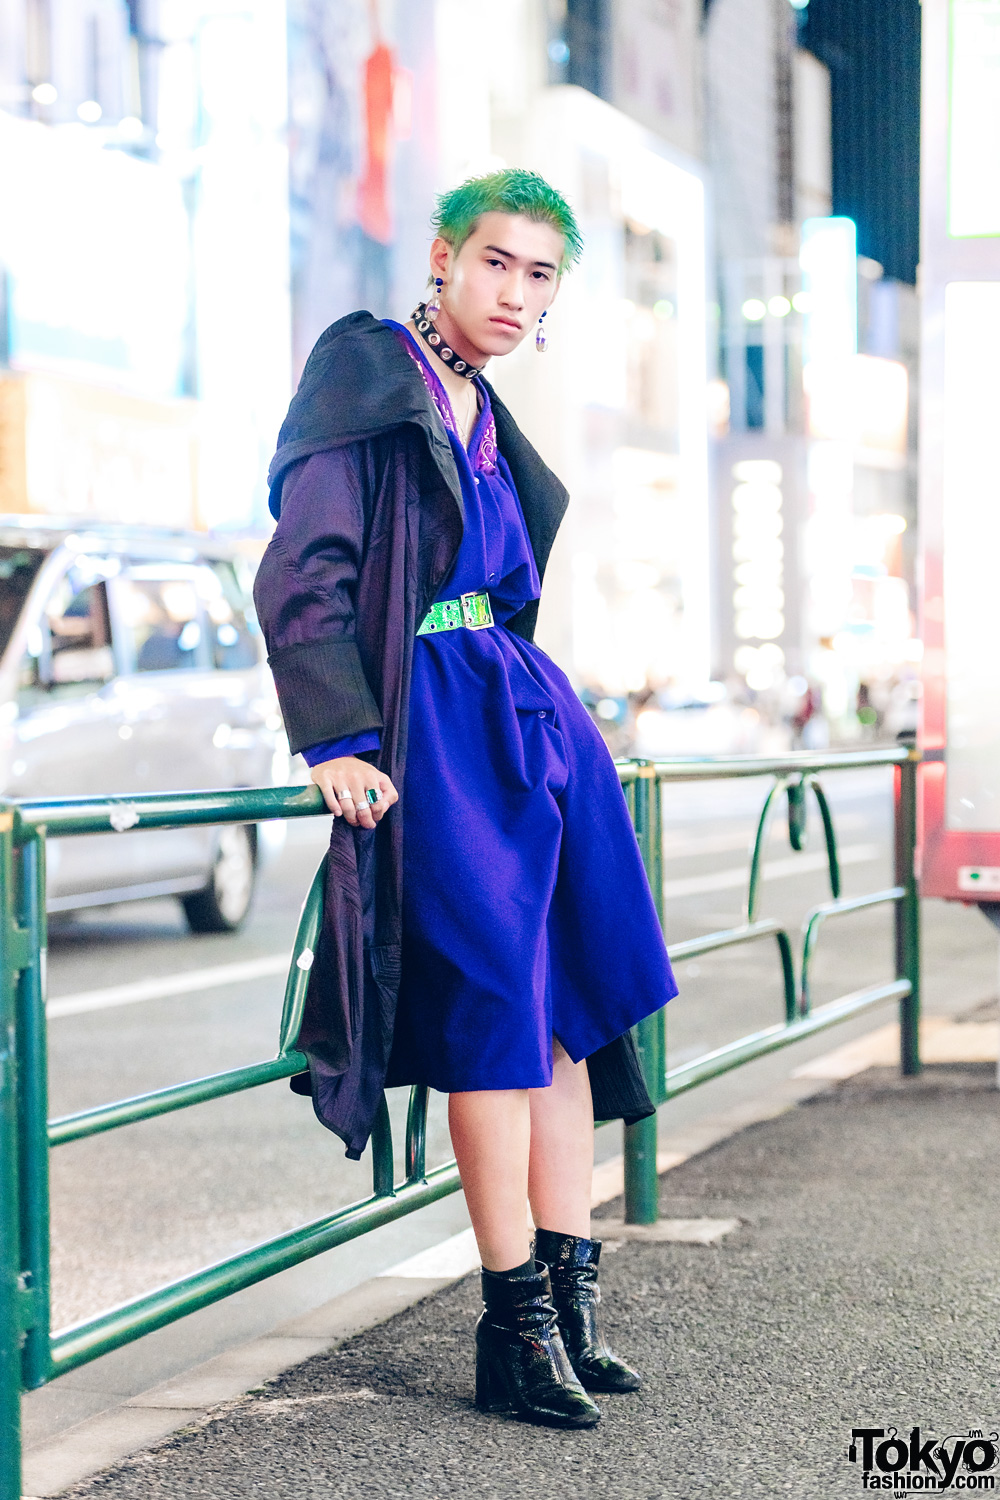 Green-Haired Harajuku Guy in Androgynous Vintage Street Fashion